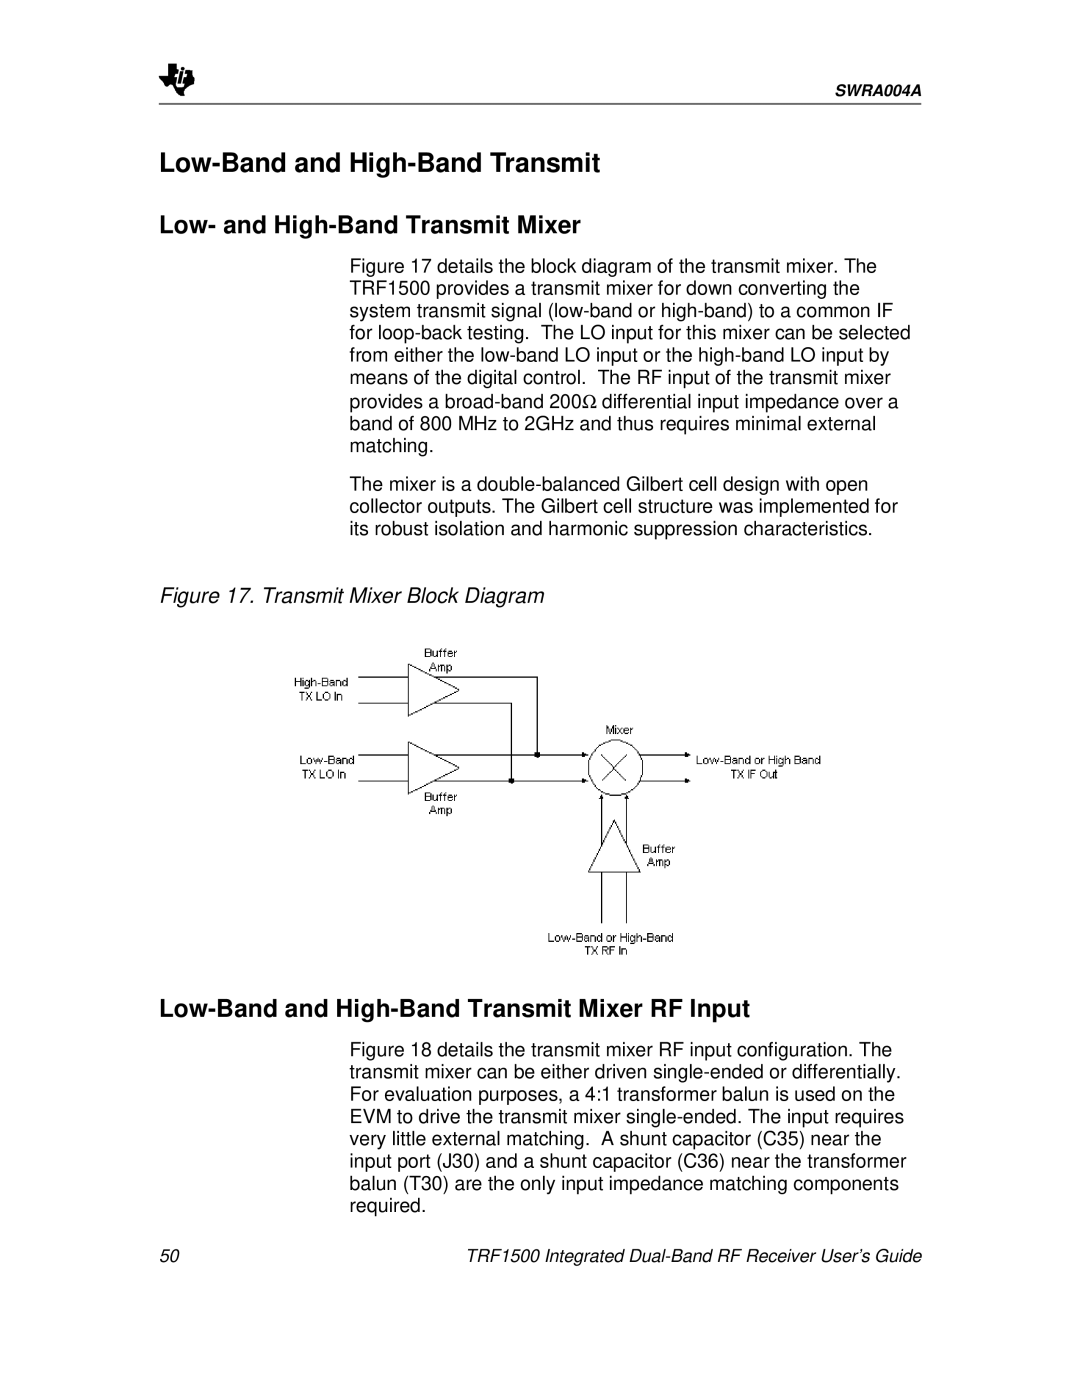 Texas Instruments TRF1500 manual Low-Bandand High-BandTransmit, Low- and High-BandTransmit Mixer 